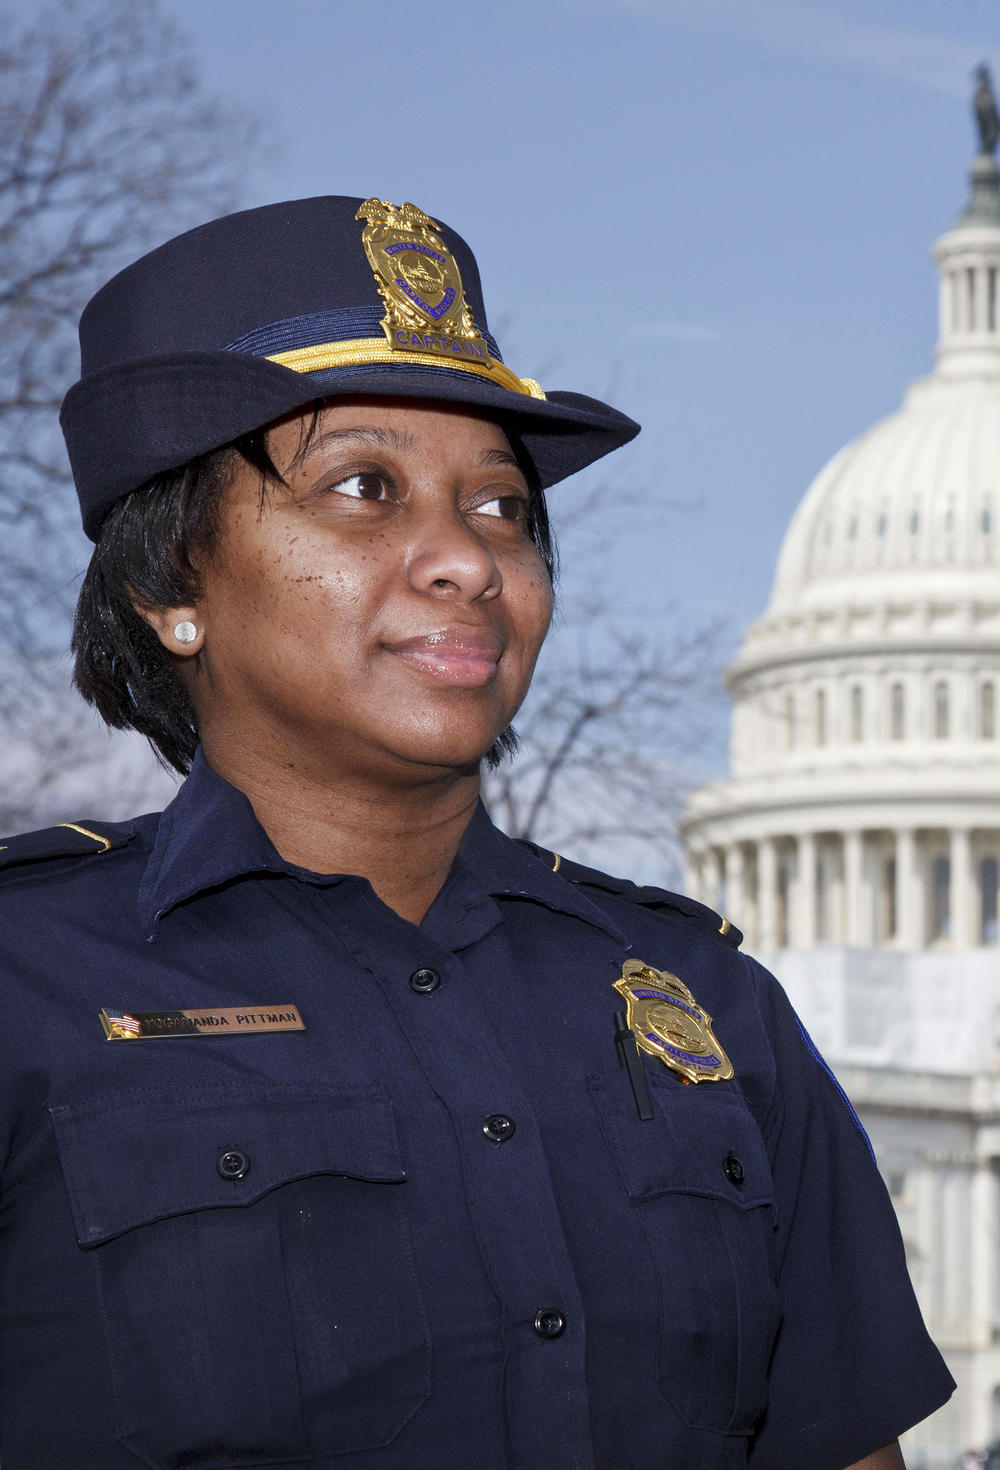 Pittman was one of the first two African American women to be promoted to the rank of captain in the U.S. Capitol Police in 2012.